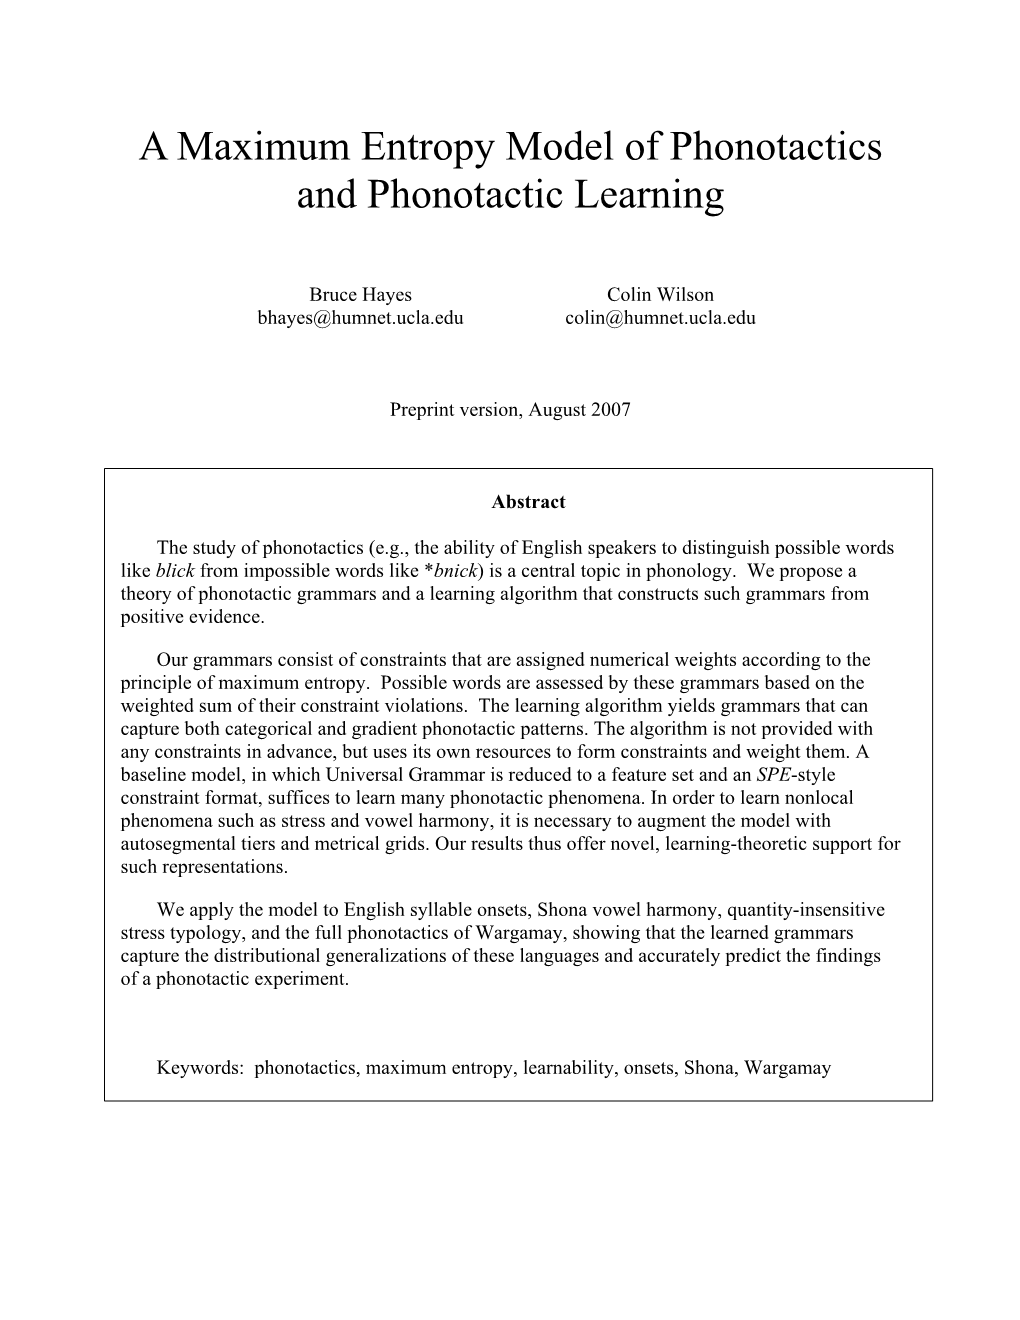 A Maximum Entropy Model of Phonotactics and Phonotactic Learning